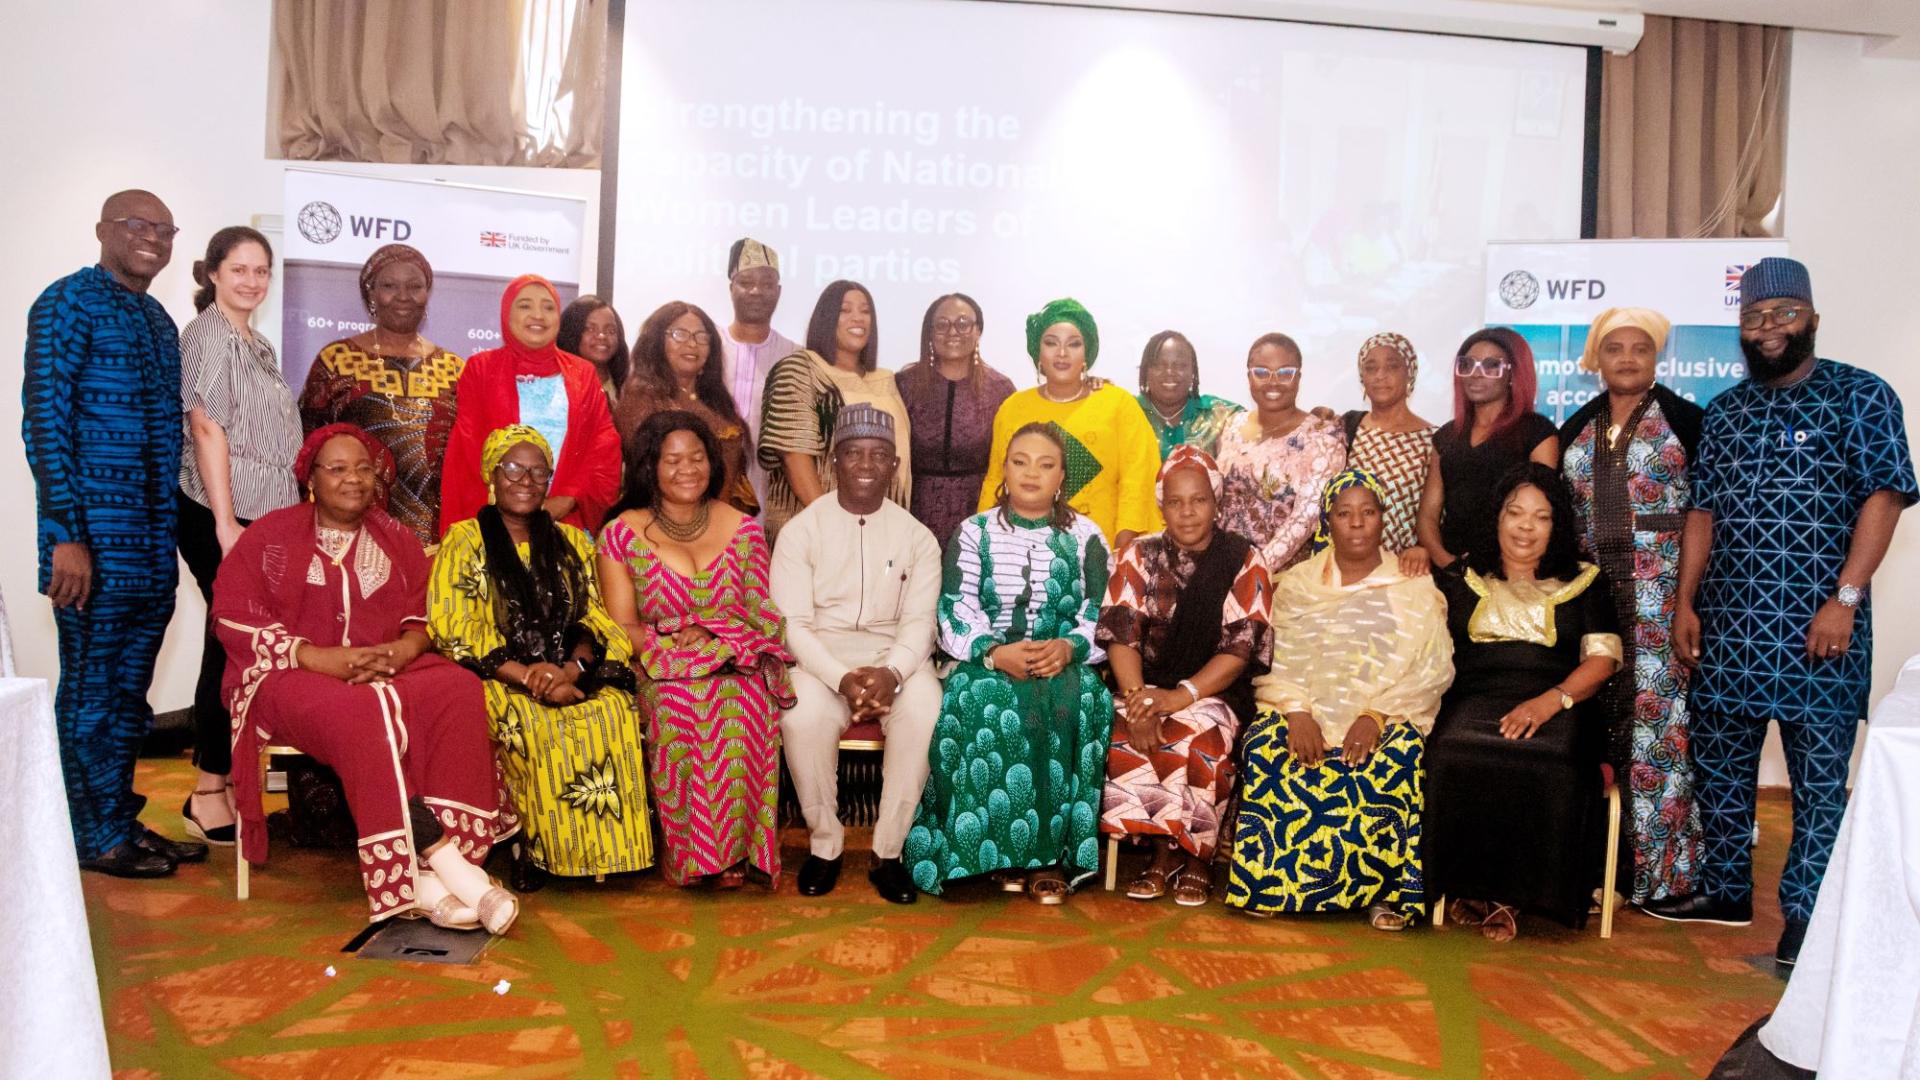 Formal group shot of the women leaders forum